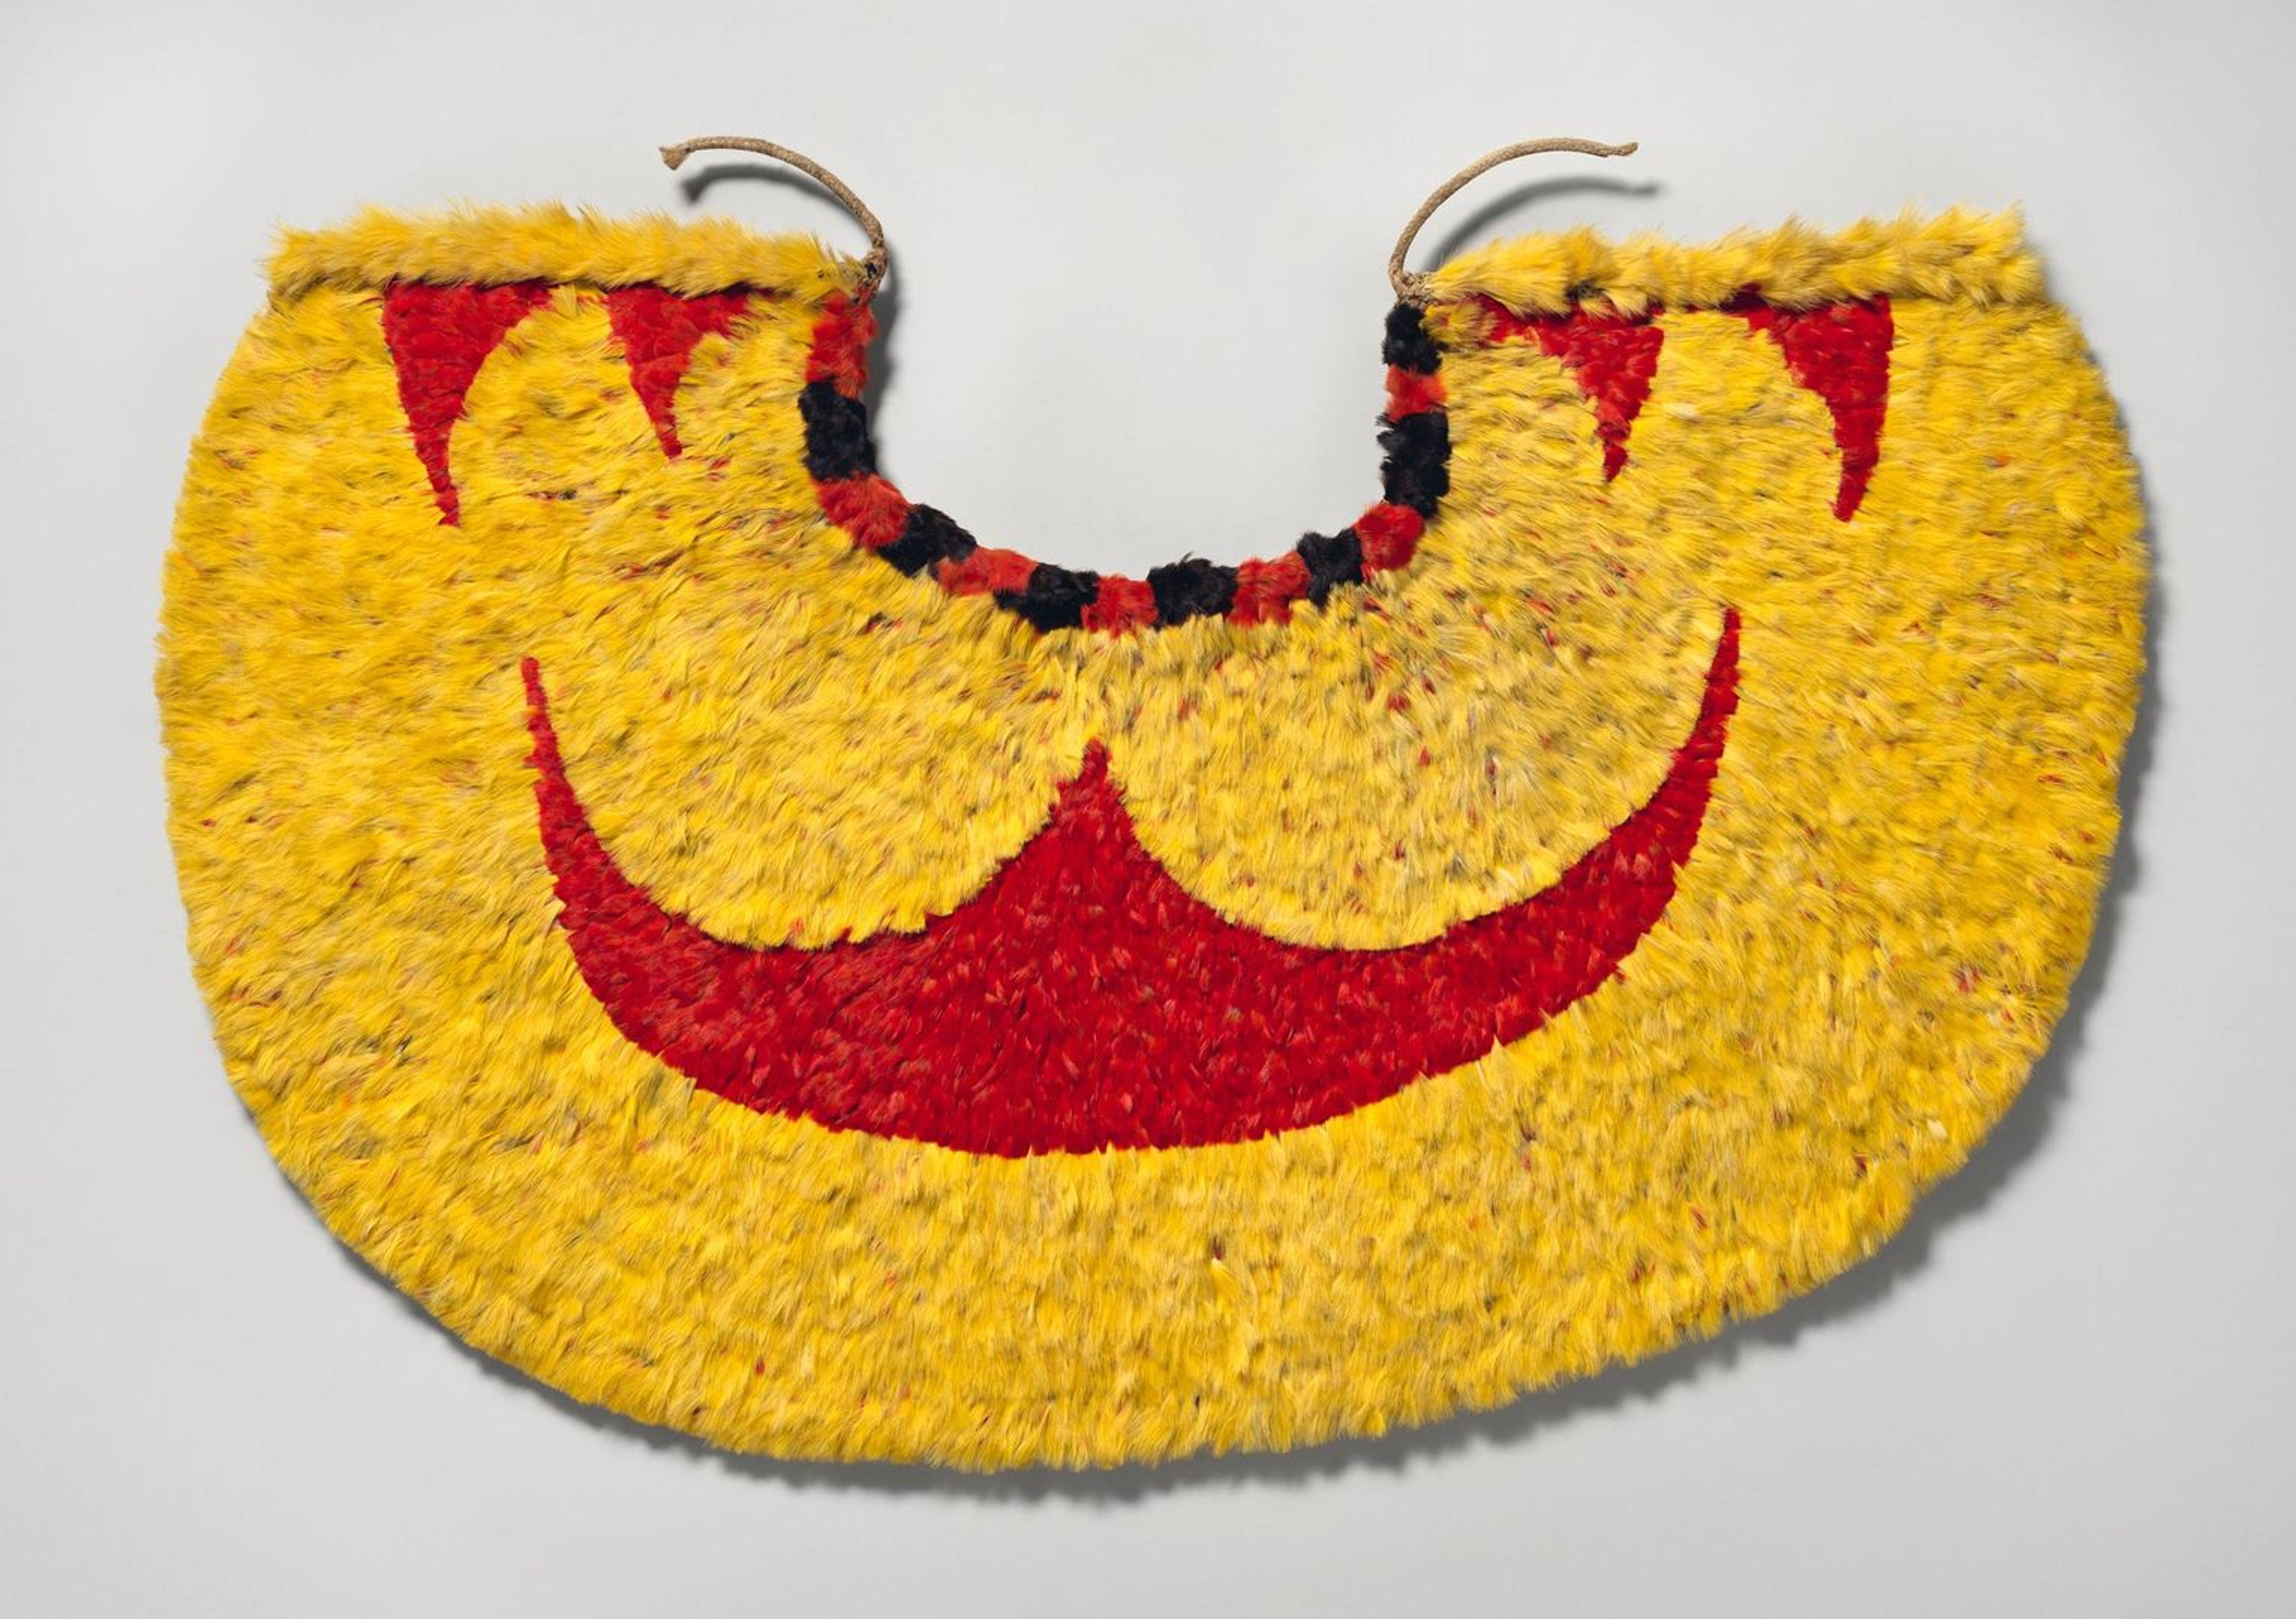 A gorgeous Hawai'ian cape made of red and yellow feathers